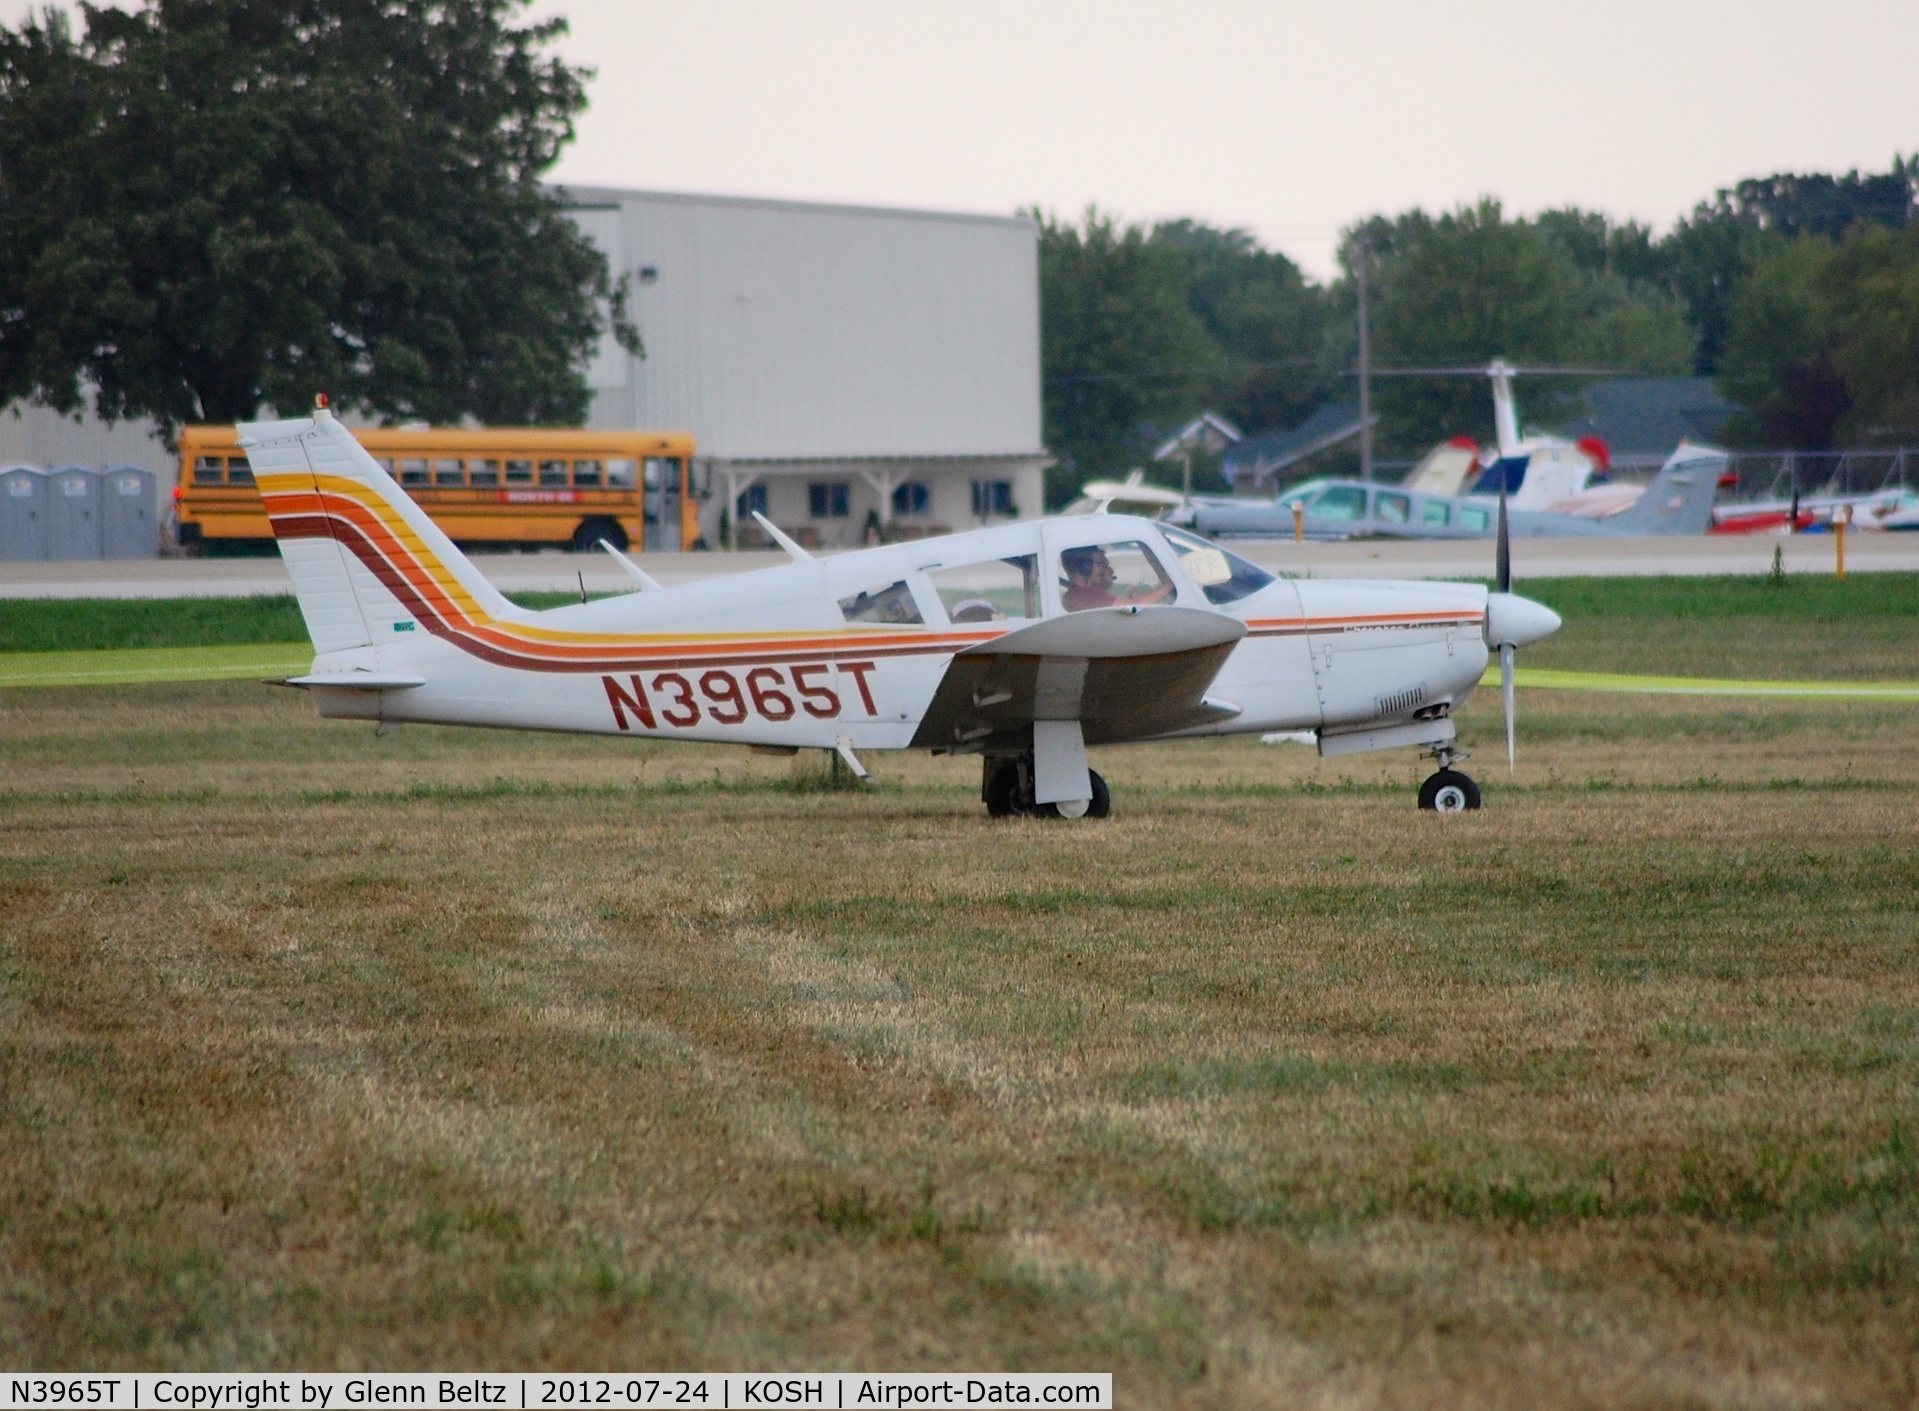 N3965T, 1967 Piper PA-28R-180 Cherokee Arrow C/N 28R-30311, Taxiing for departure at EAA Airventure/Oshkosh on 24 July 2012.